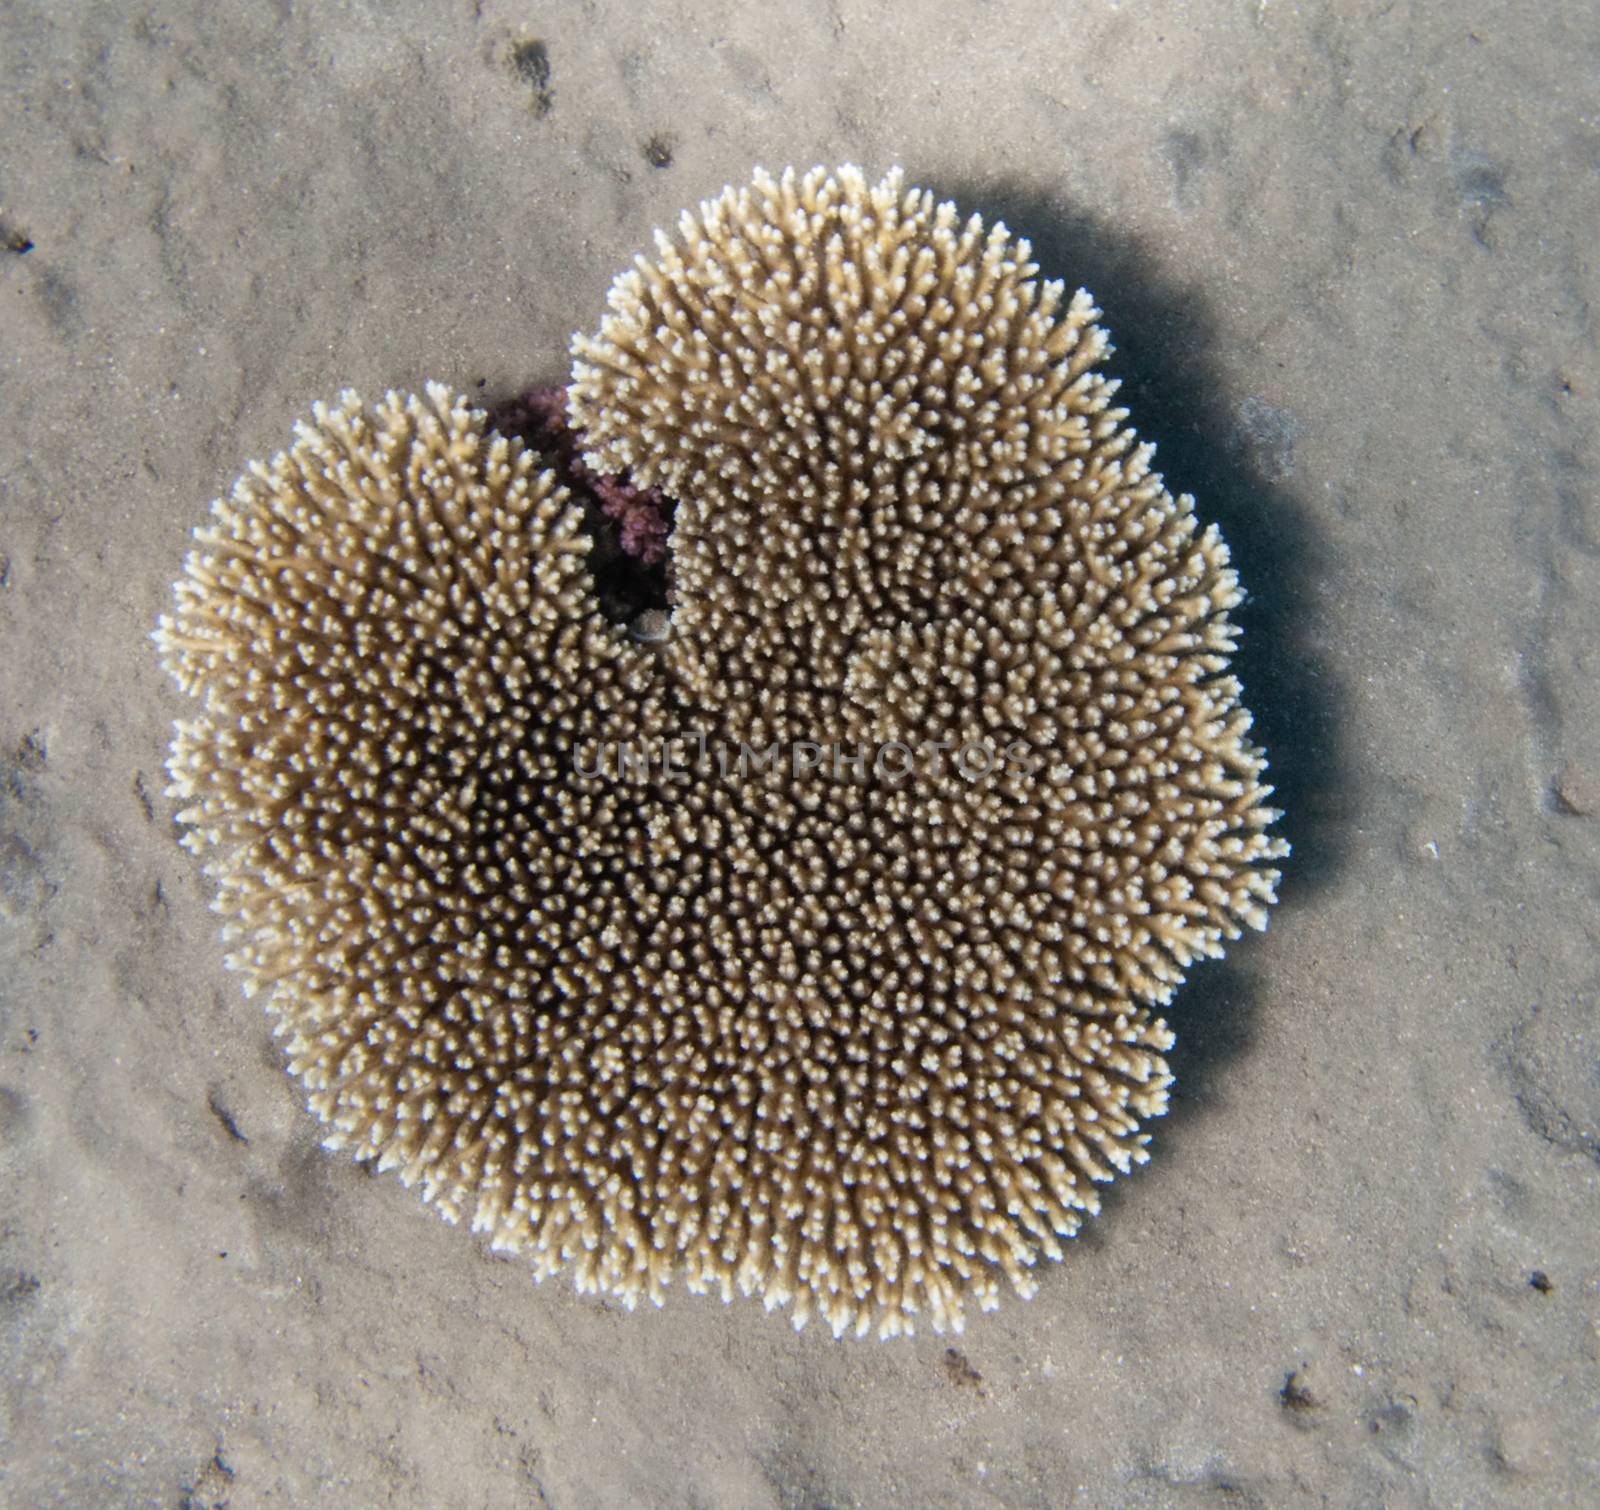 Heart-shaped Egyptian coral in the Three Polls bay